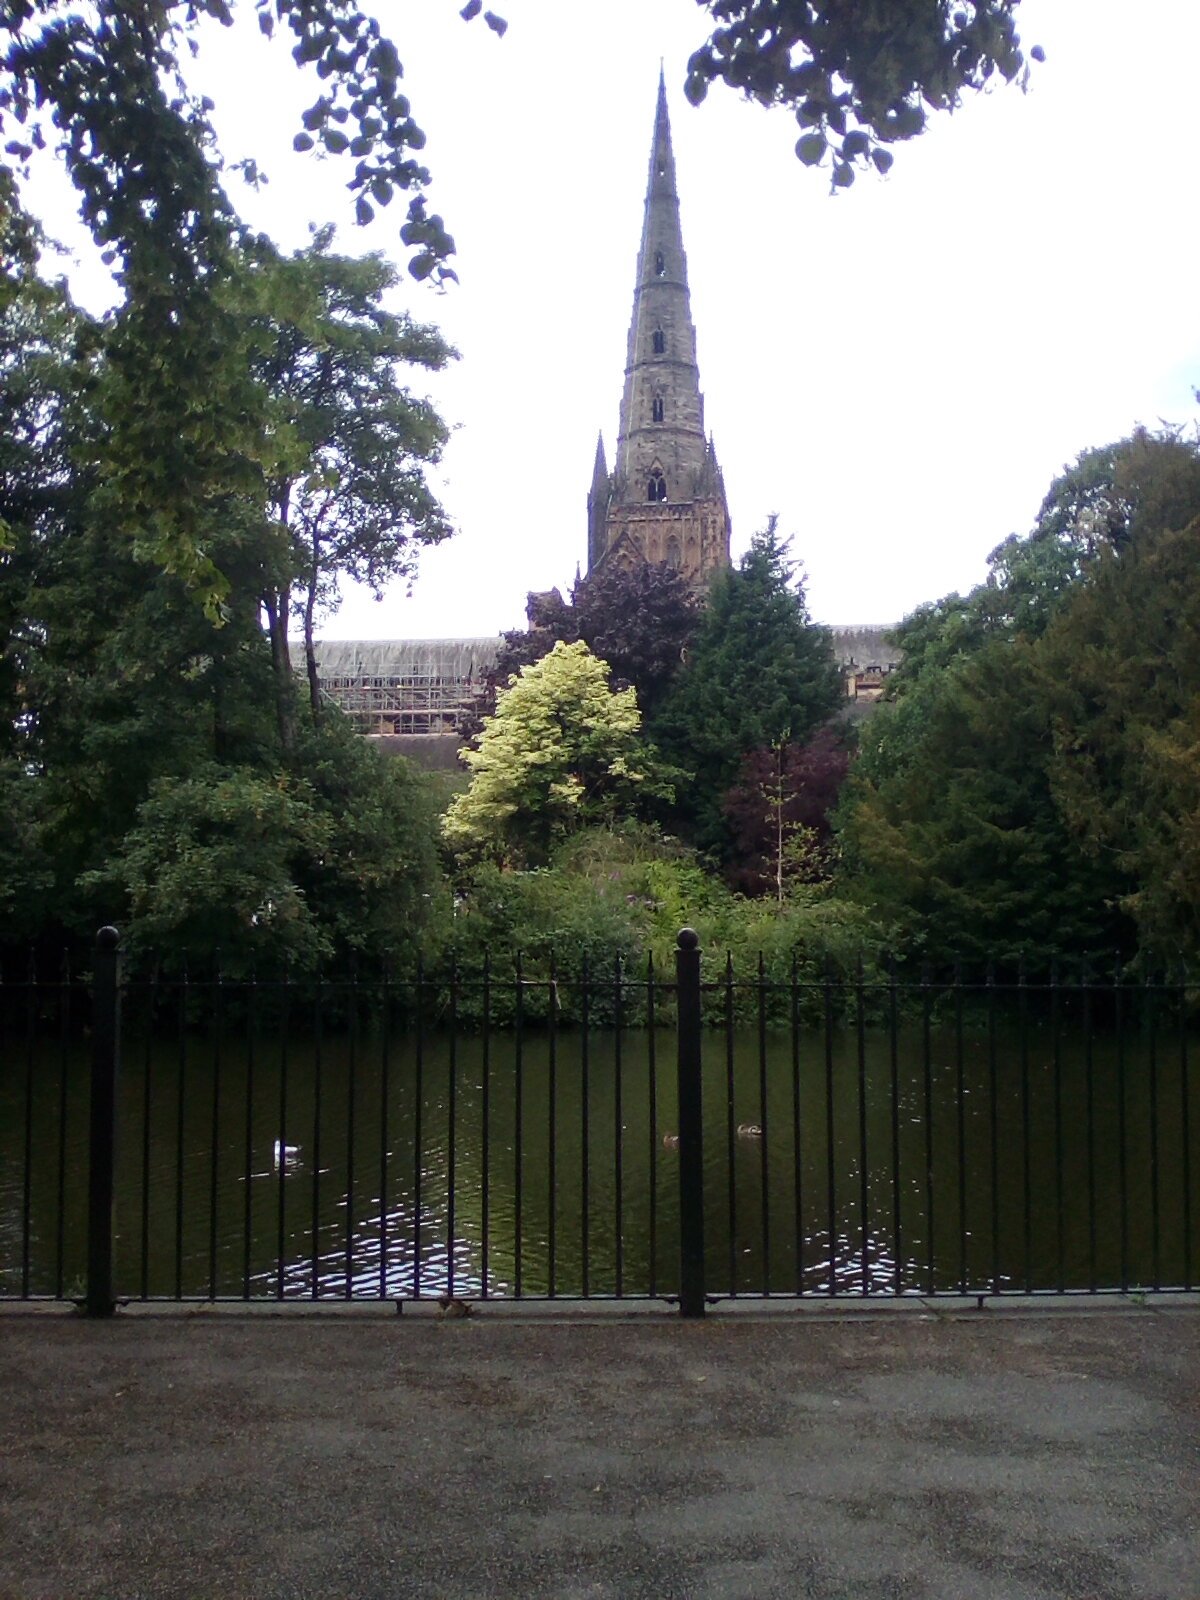 View of the Cathedral from across Minster Pool.